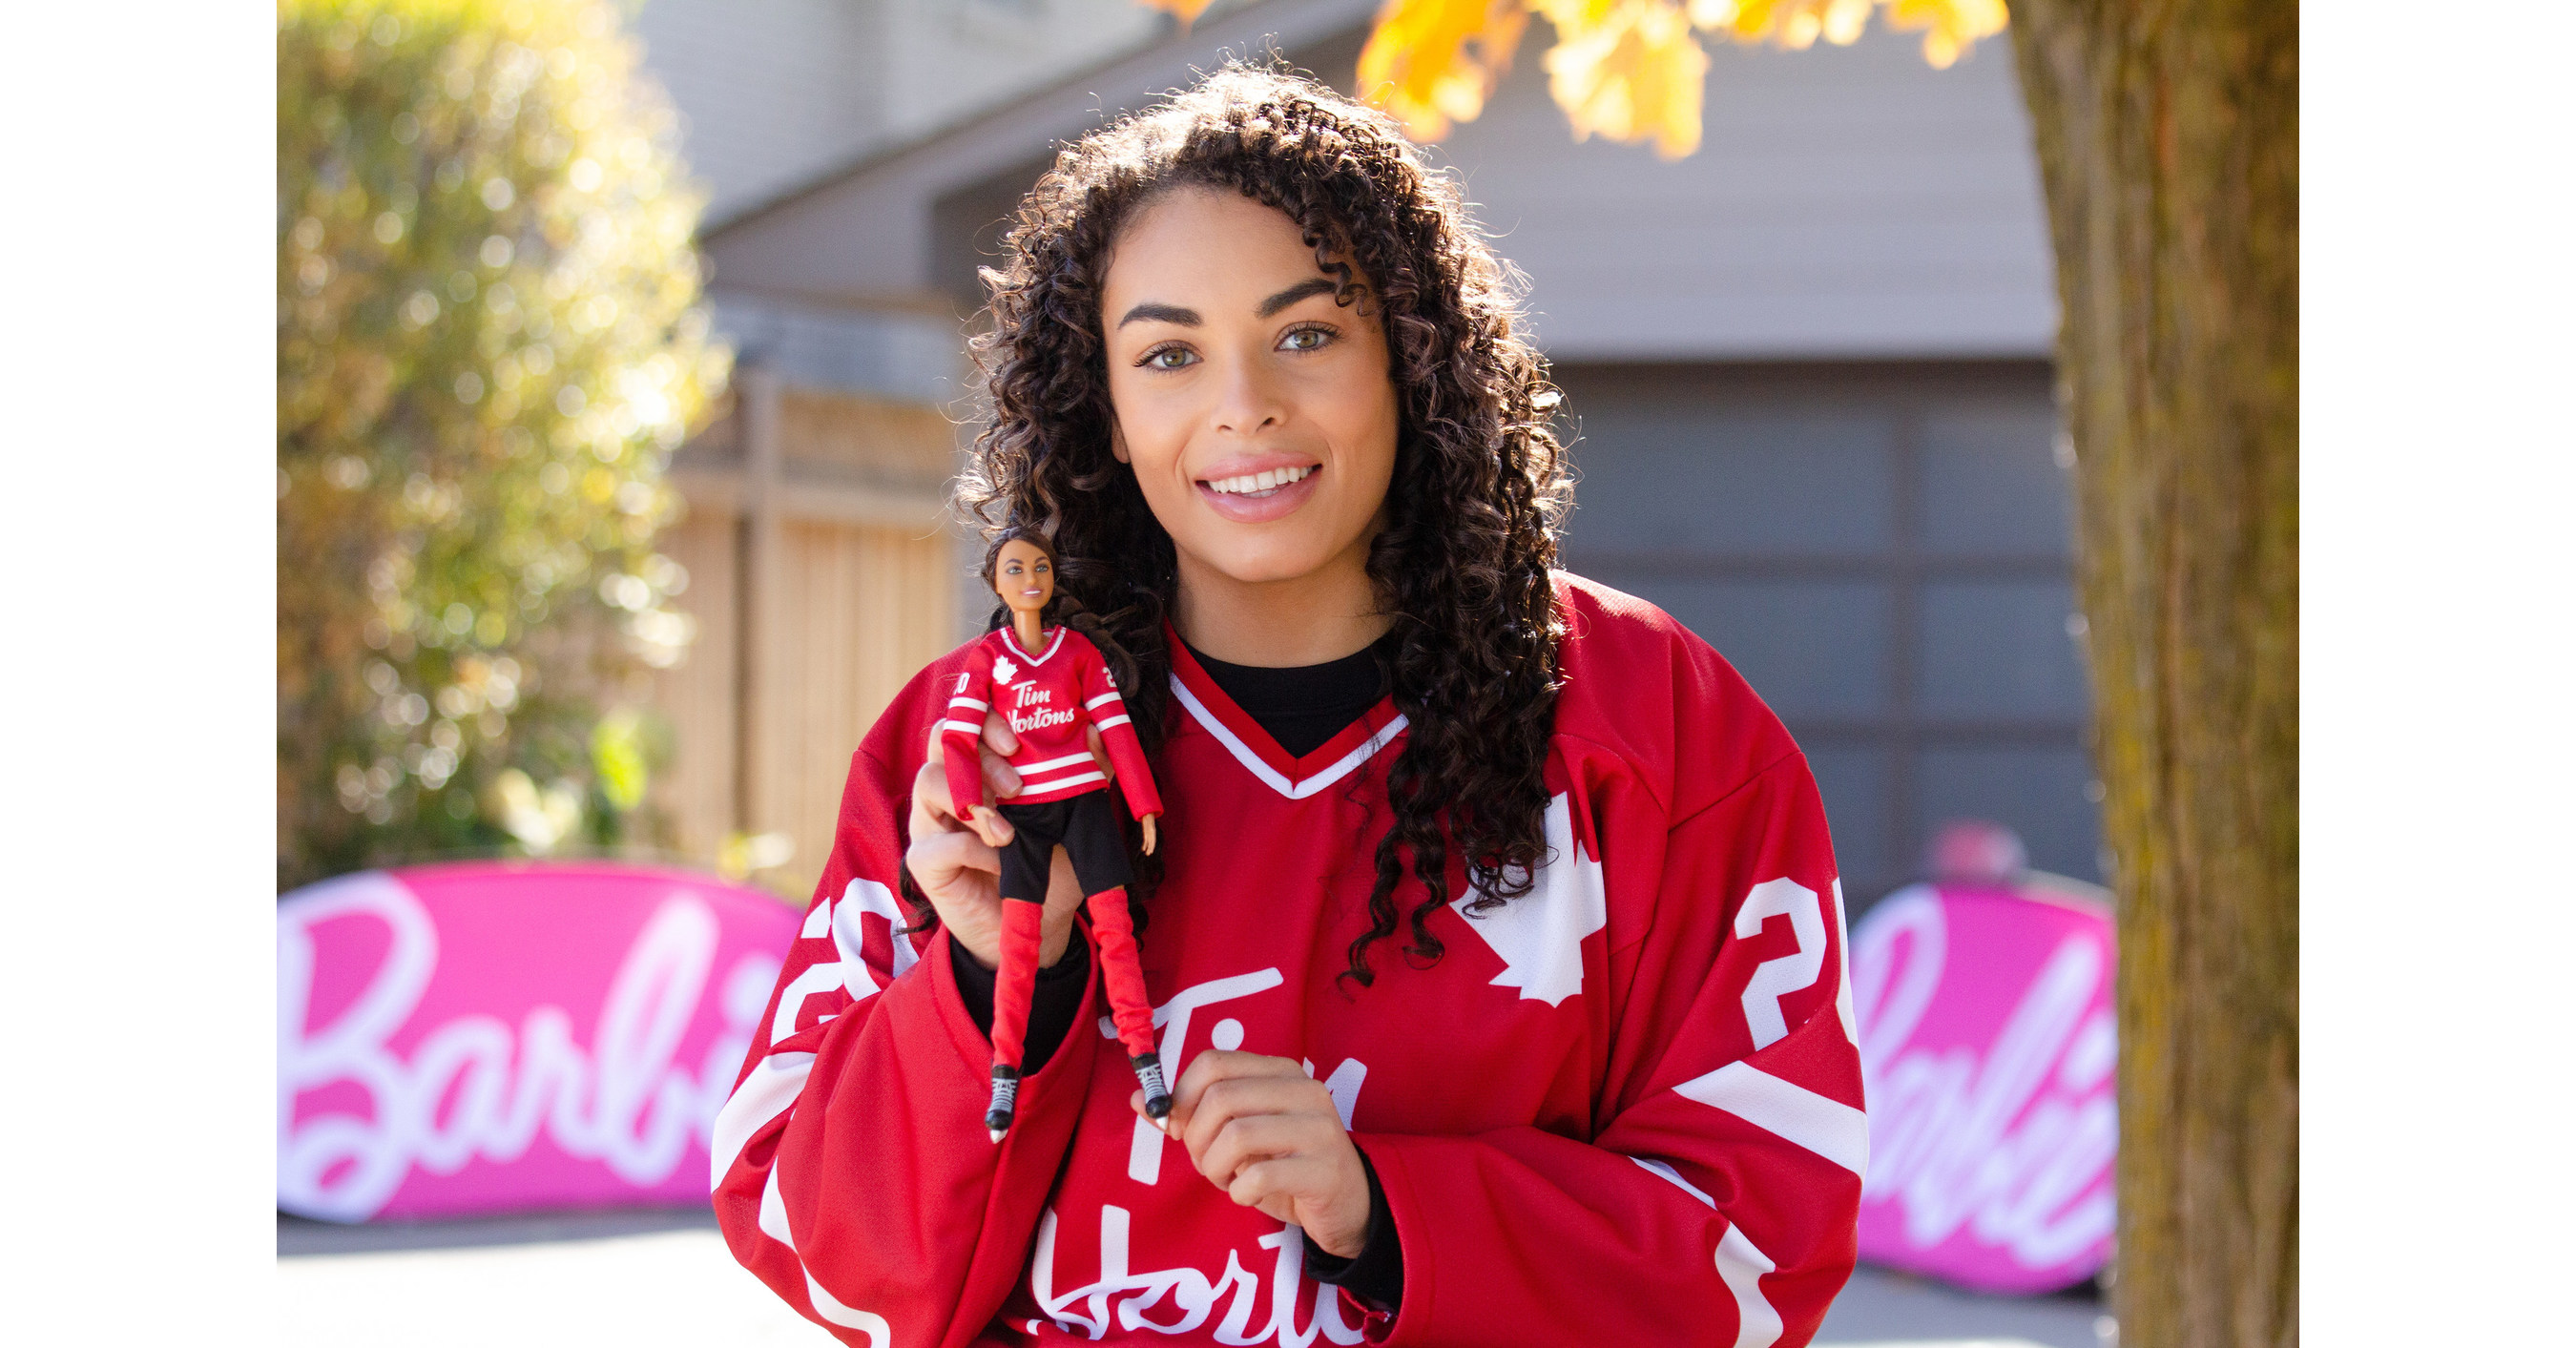 Tim Hortons and Barbie Team Up to Inspire Girls to Play Hockey - Licensing  International